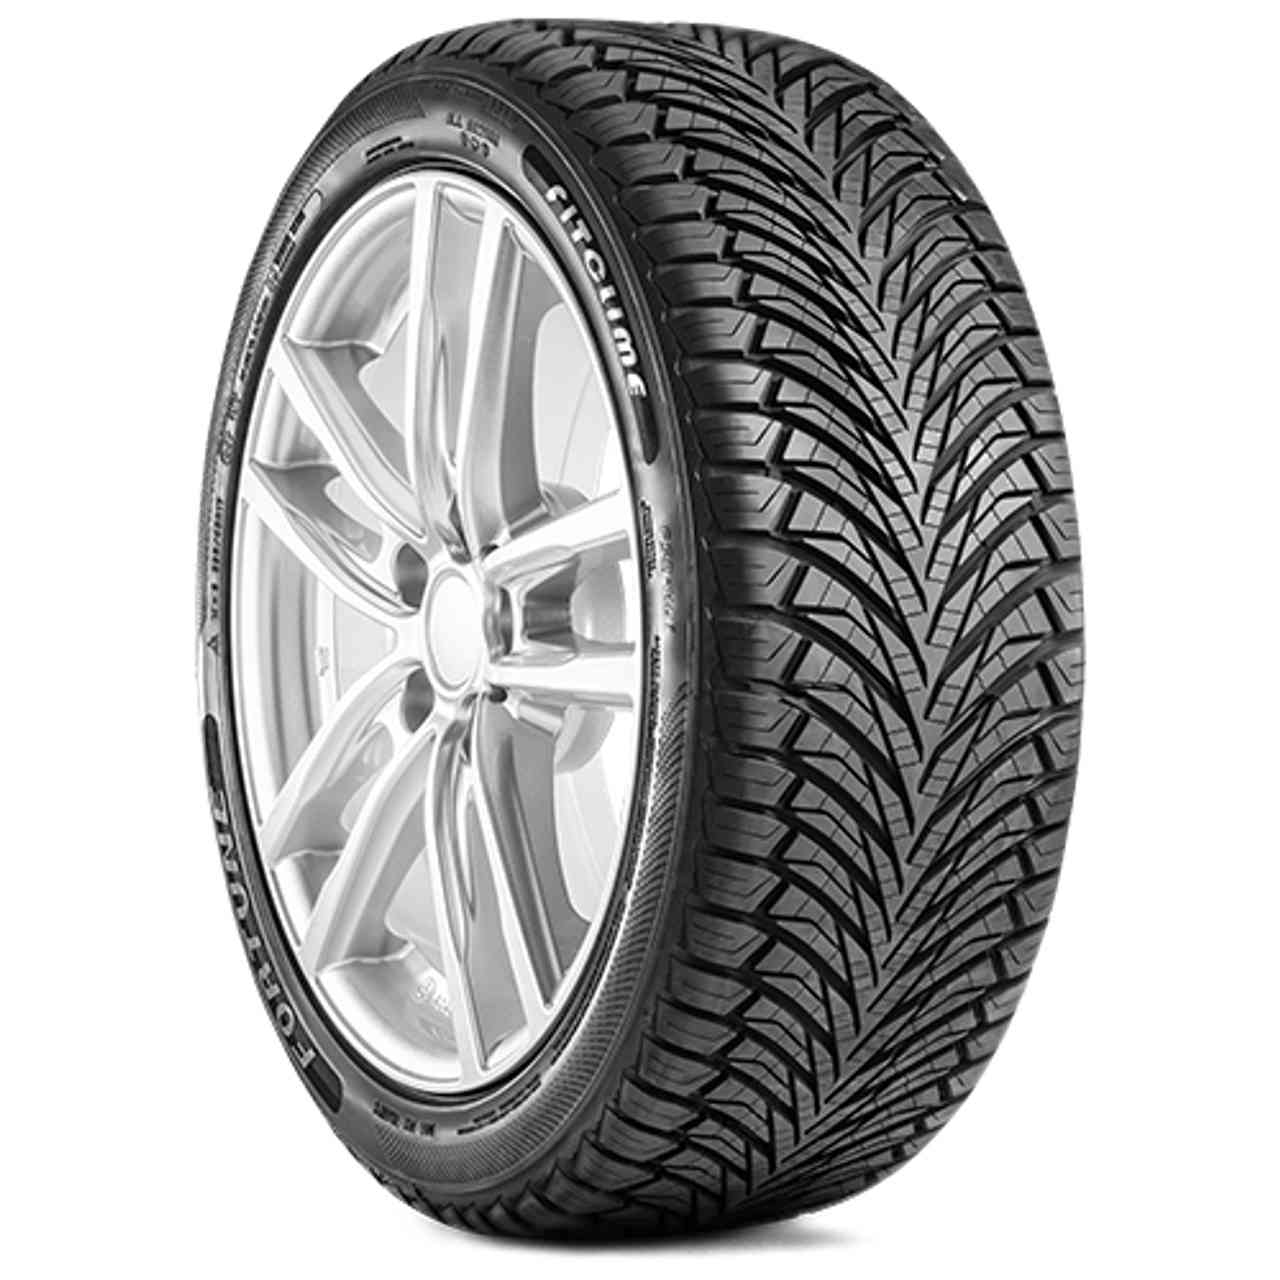 FORTUNE FITCLIME FSR-401 155/80R13 79T BSW